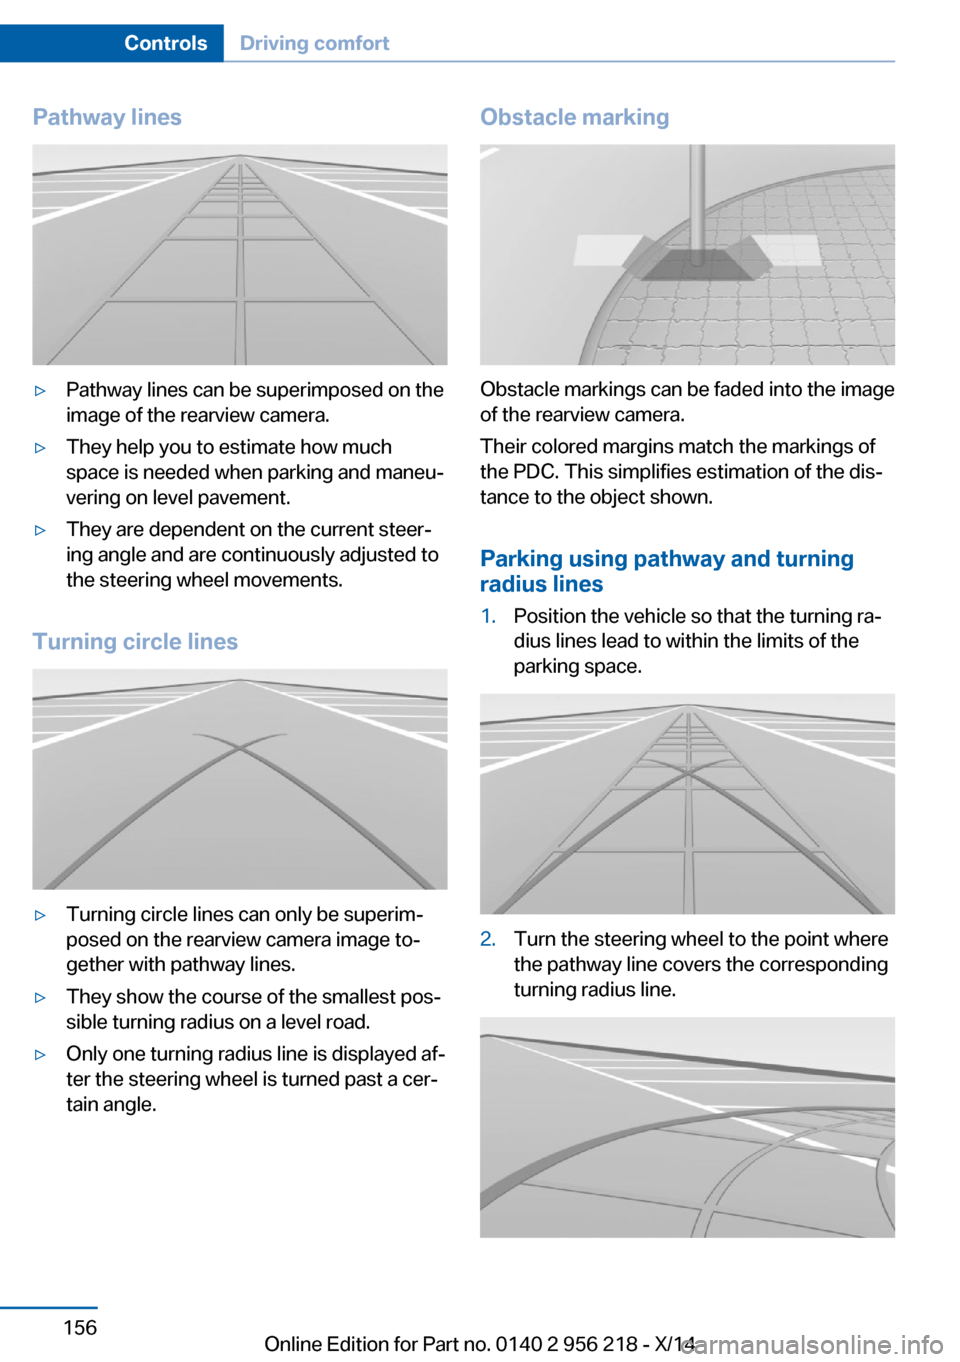 BMW 5 SERIES 2014 F10 Owners Manual Pathway lines▷Pathway lines can be superimposed on the
image of the rearview camera.▷They help you to estimate how much
space is needed when parking and maneu‐
vering on level pavement.▷They a